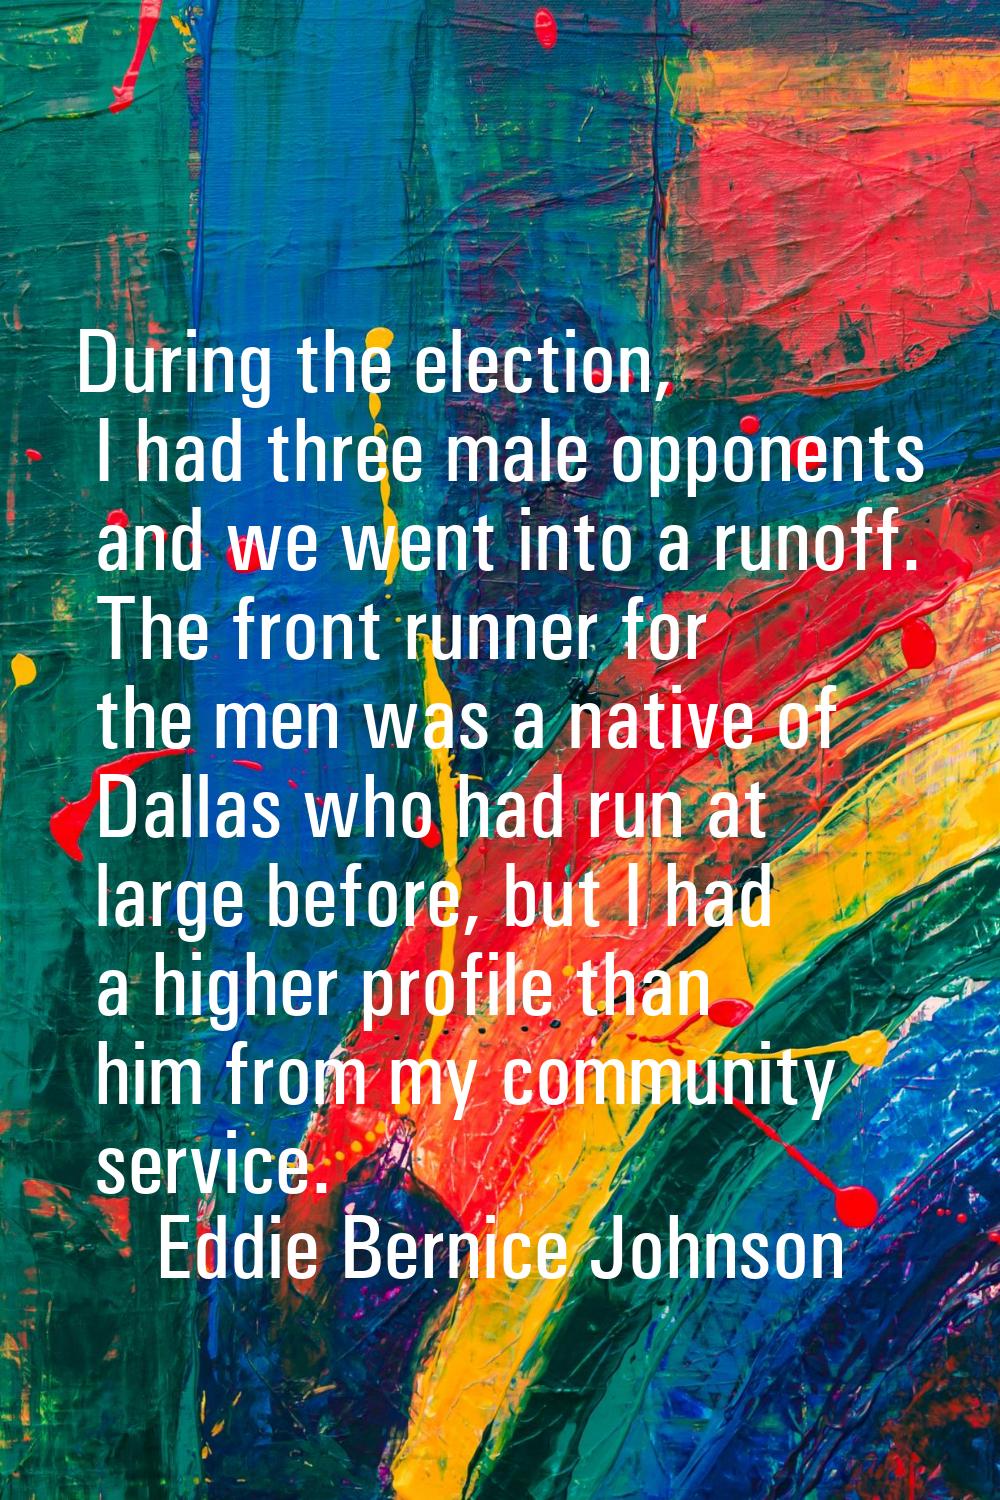 During the election, I had three male opponents and we went into a runoff. The front runner for the